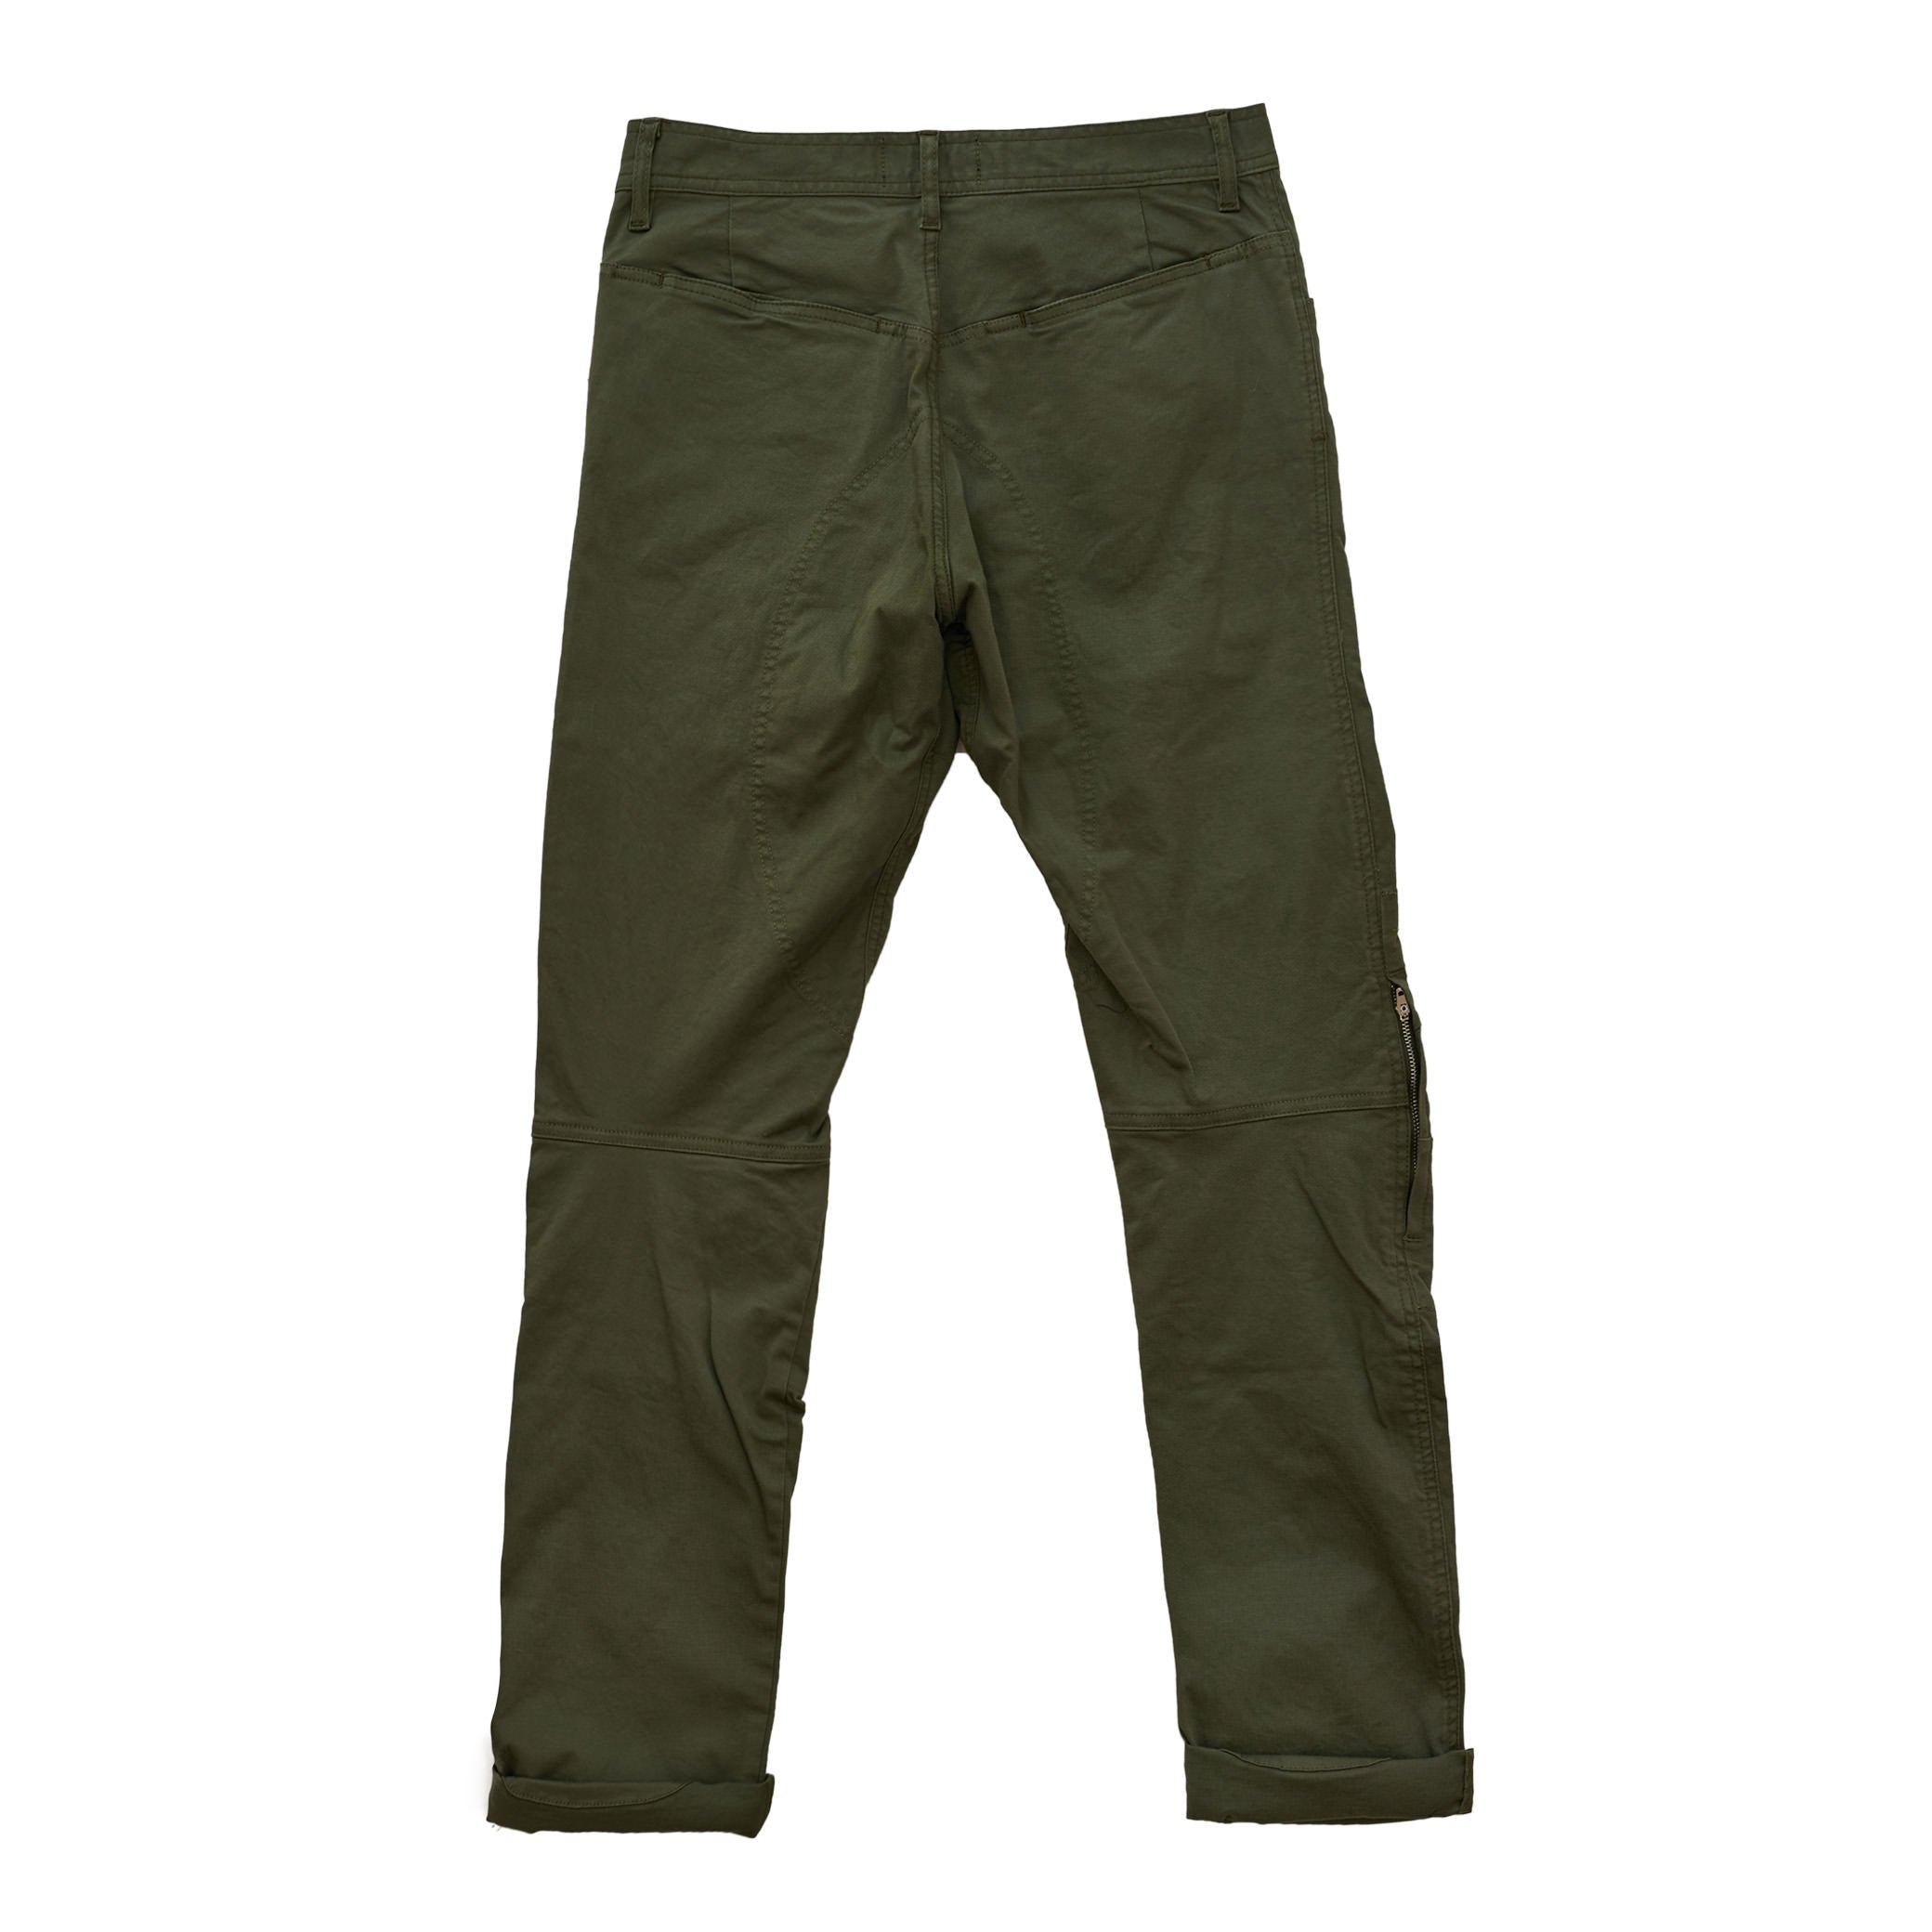 Norman Riding Pants - Olive – Jane Motorcycles